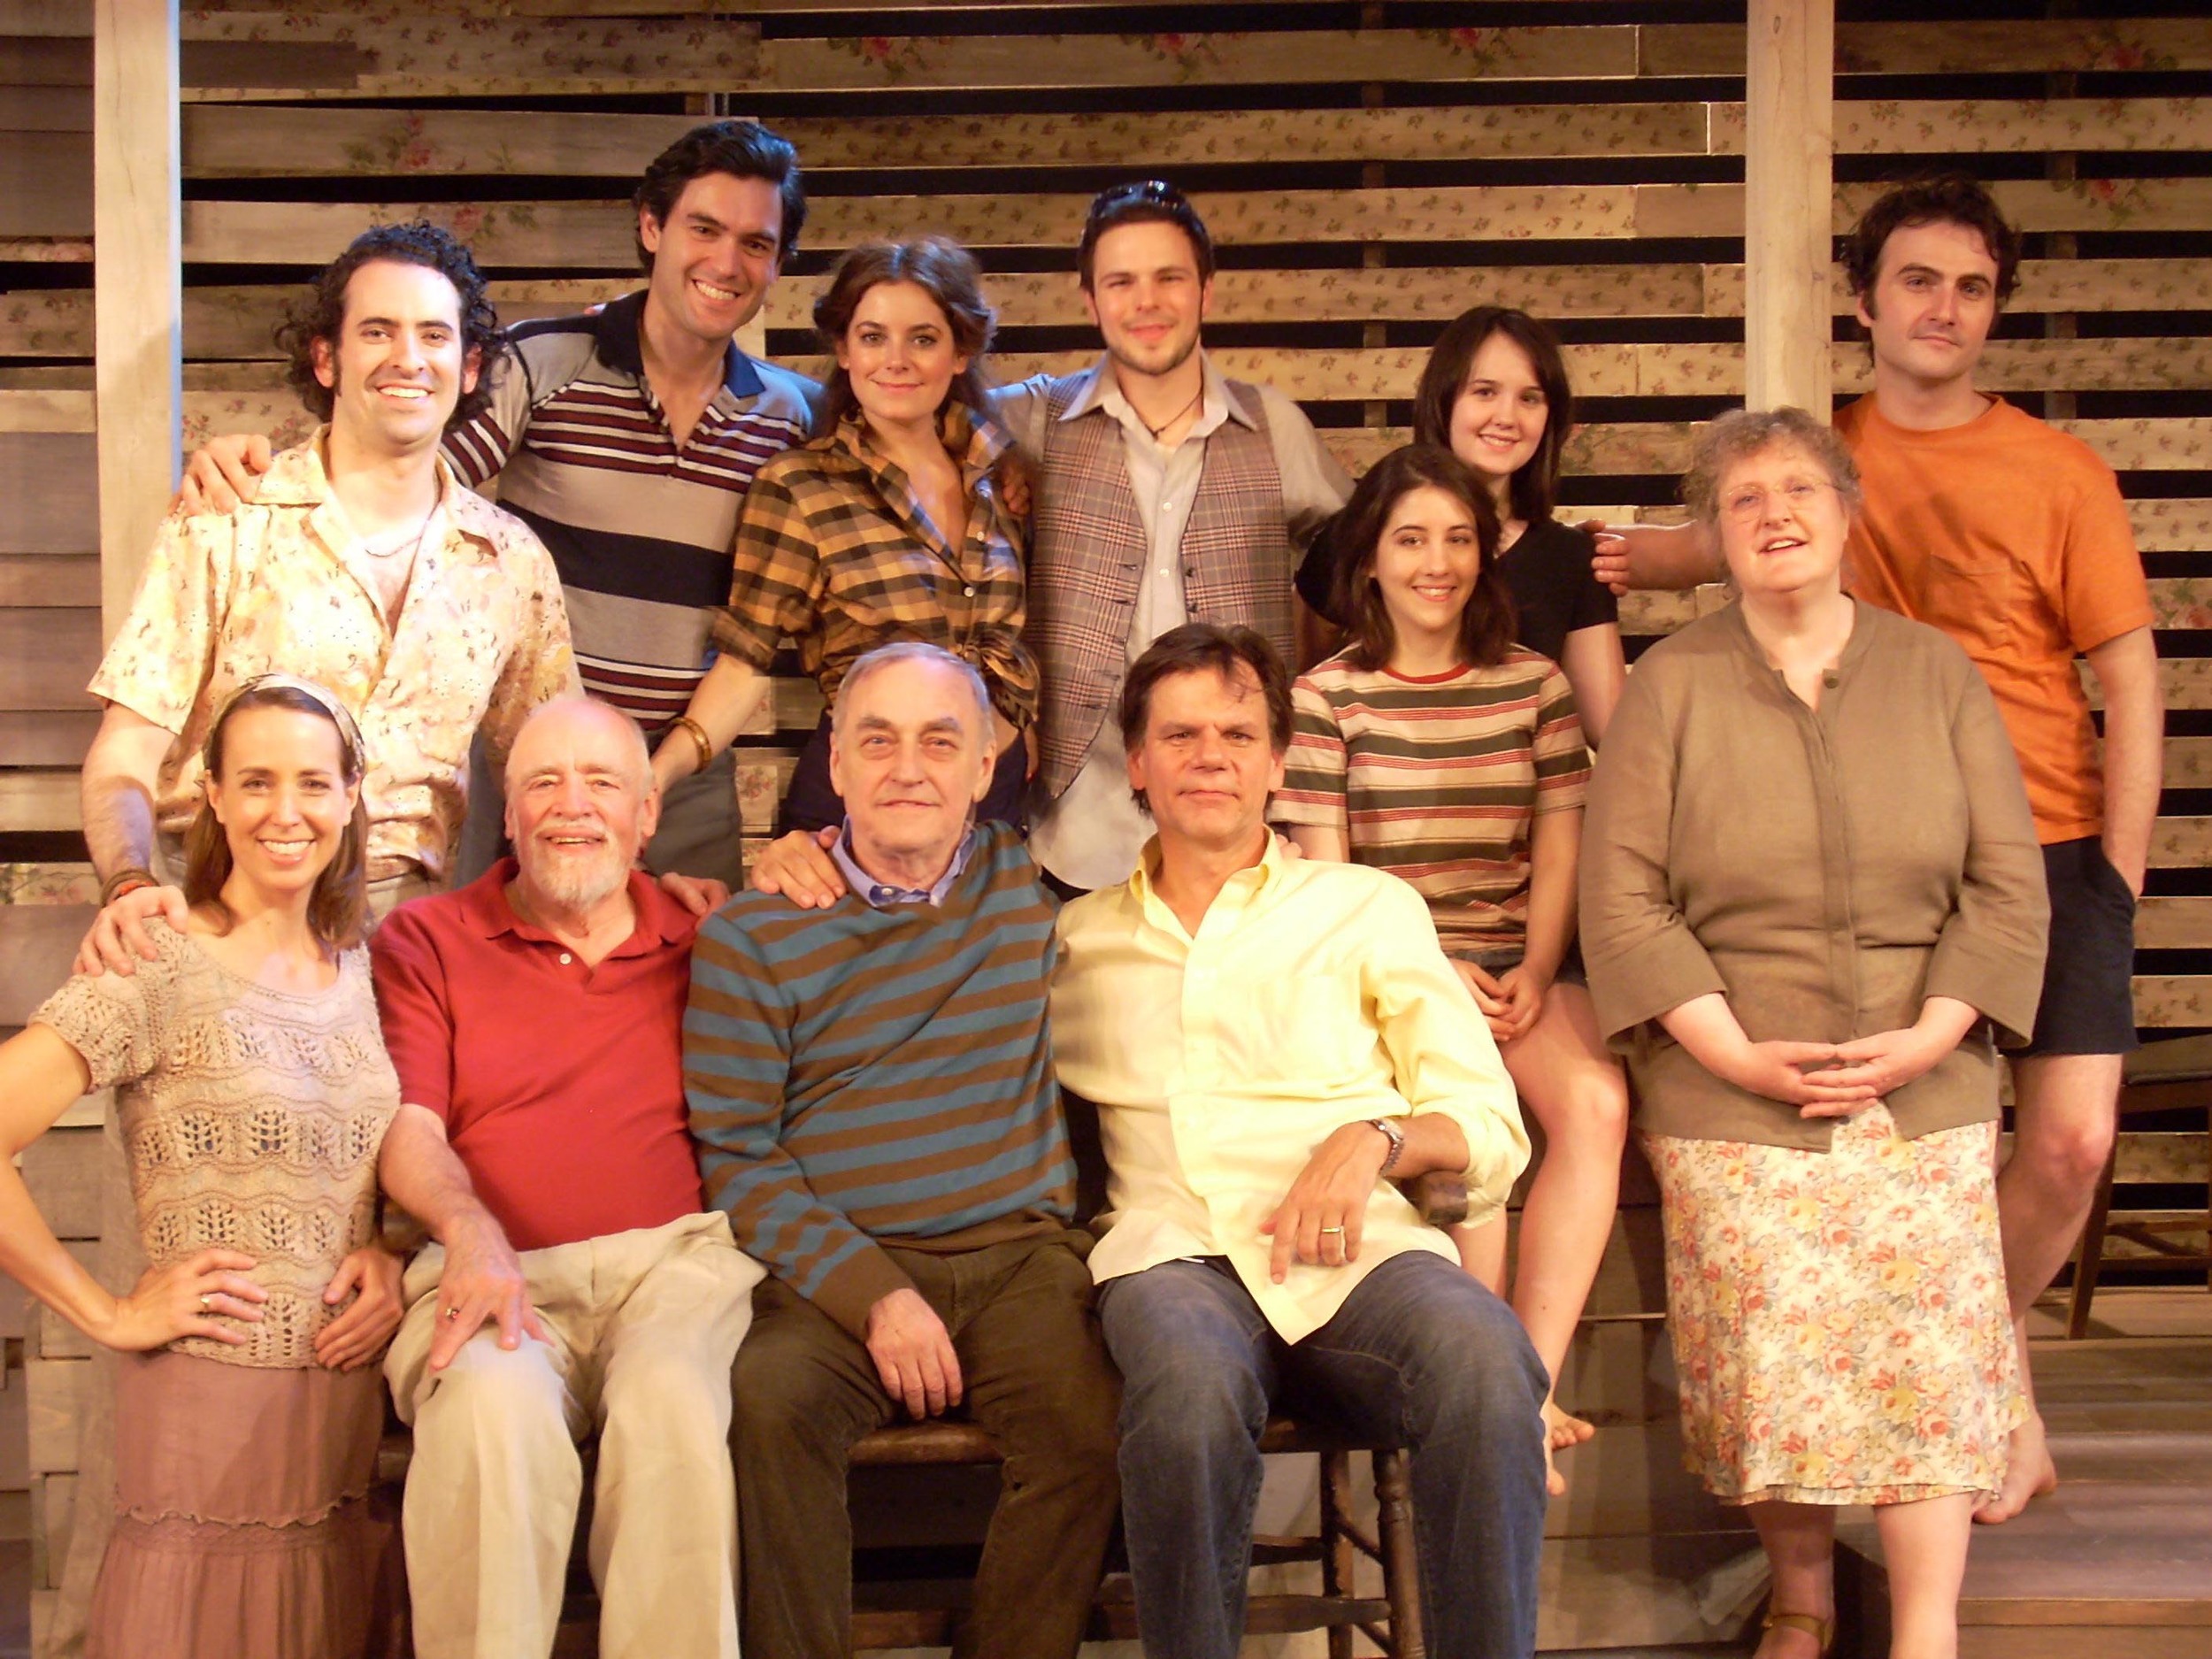 Peter with Lanford Wilson and the cast of "Fifth of July"